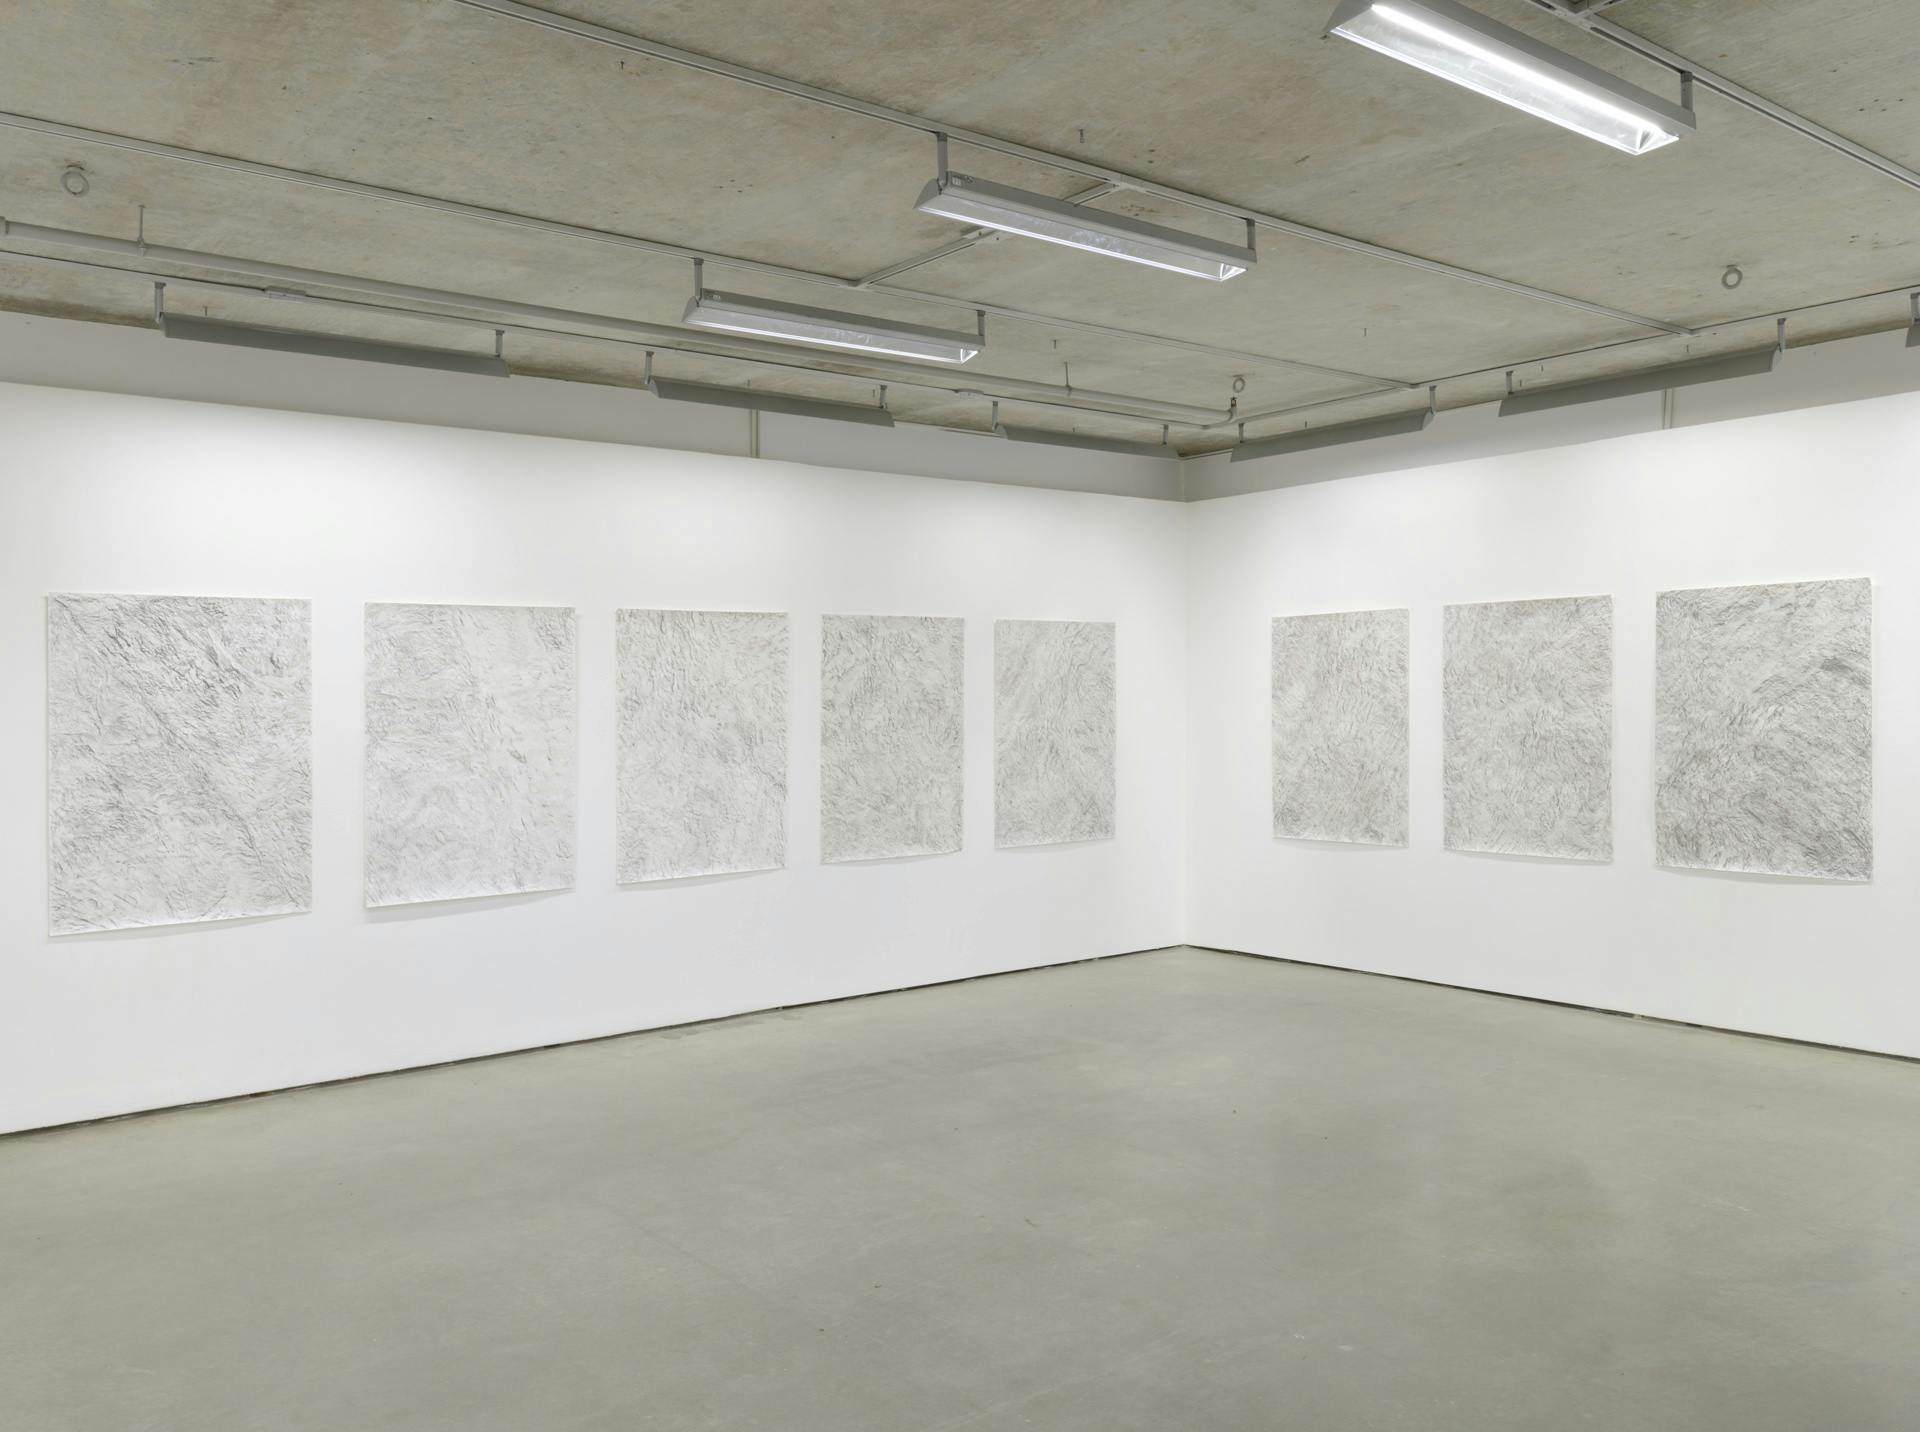 Graphite rubbings on rectangular sheets of paper arranged in a row around a corner in a room with white walls.